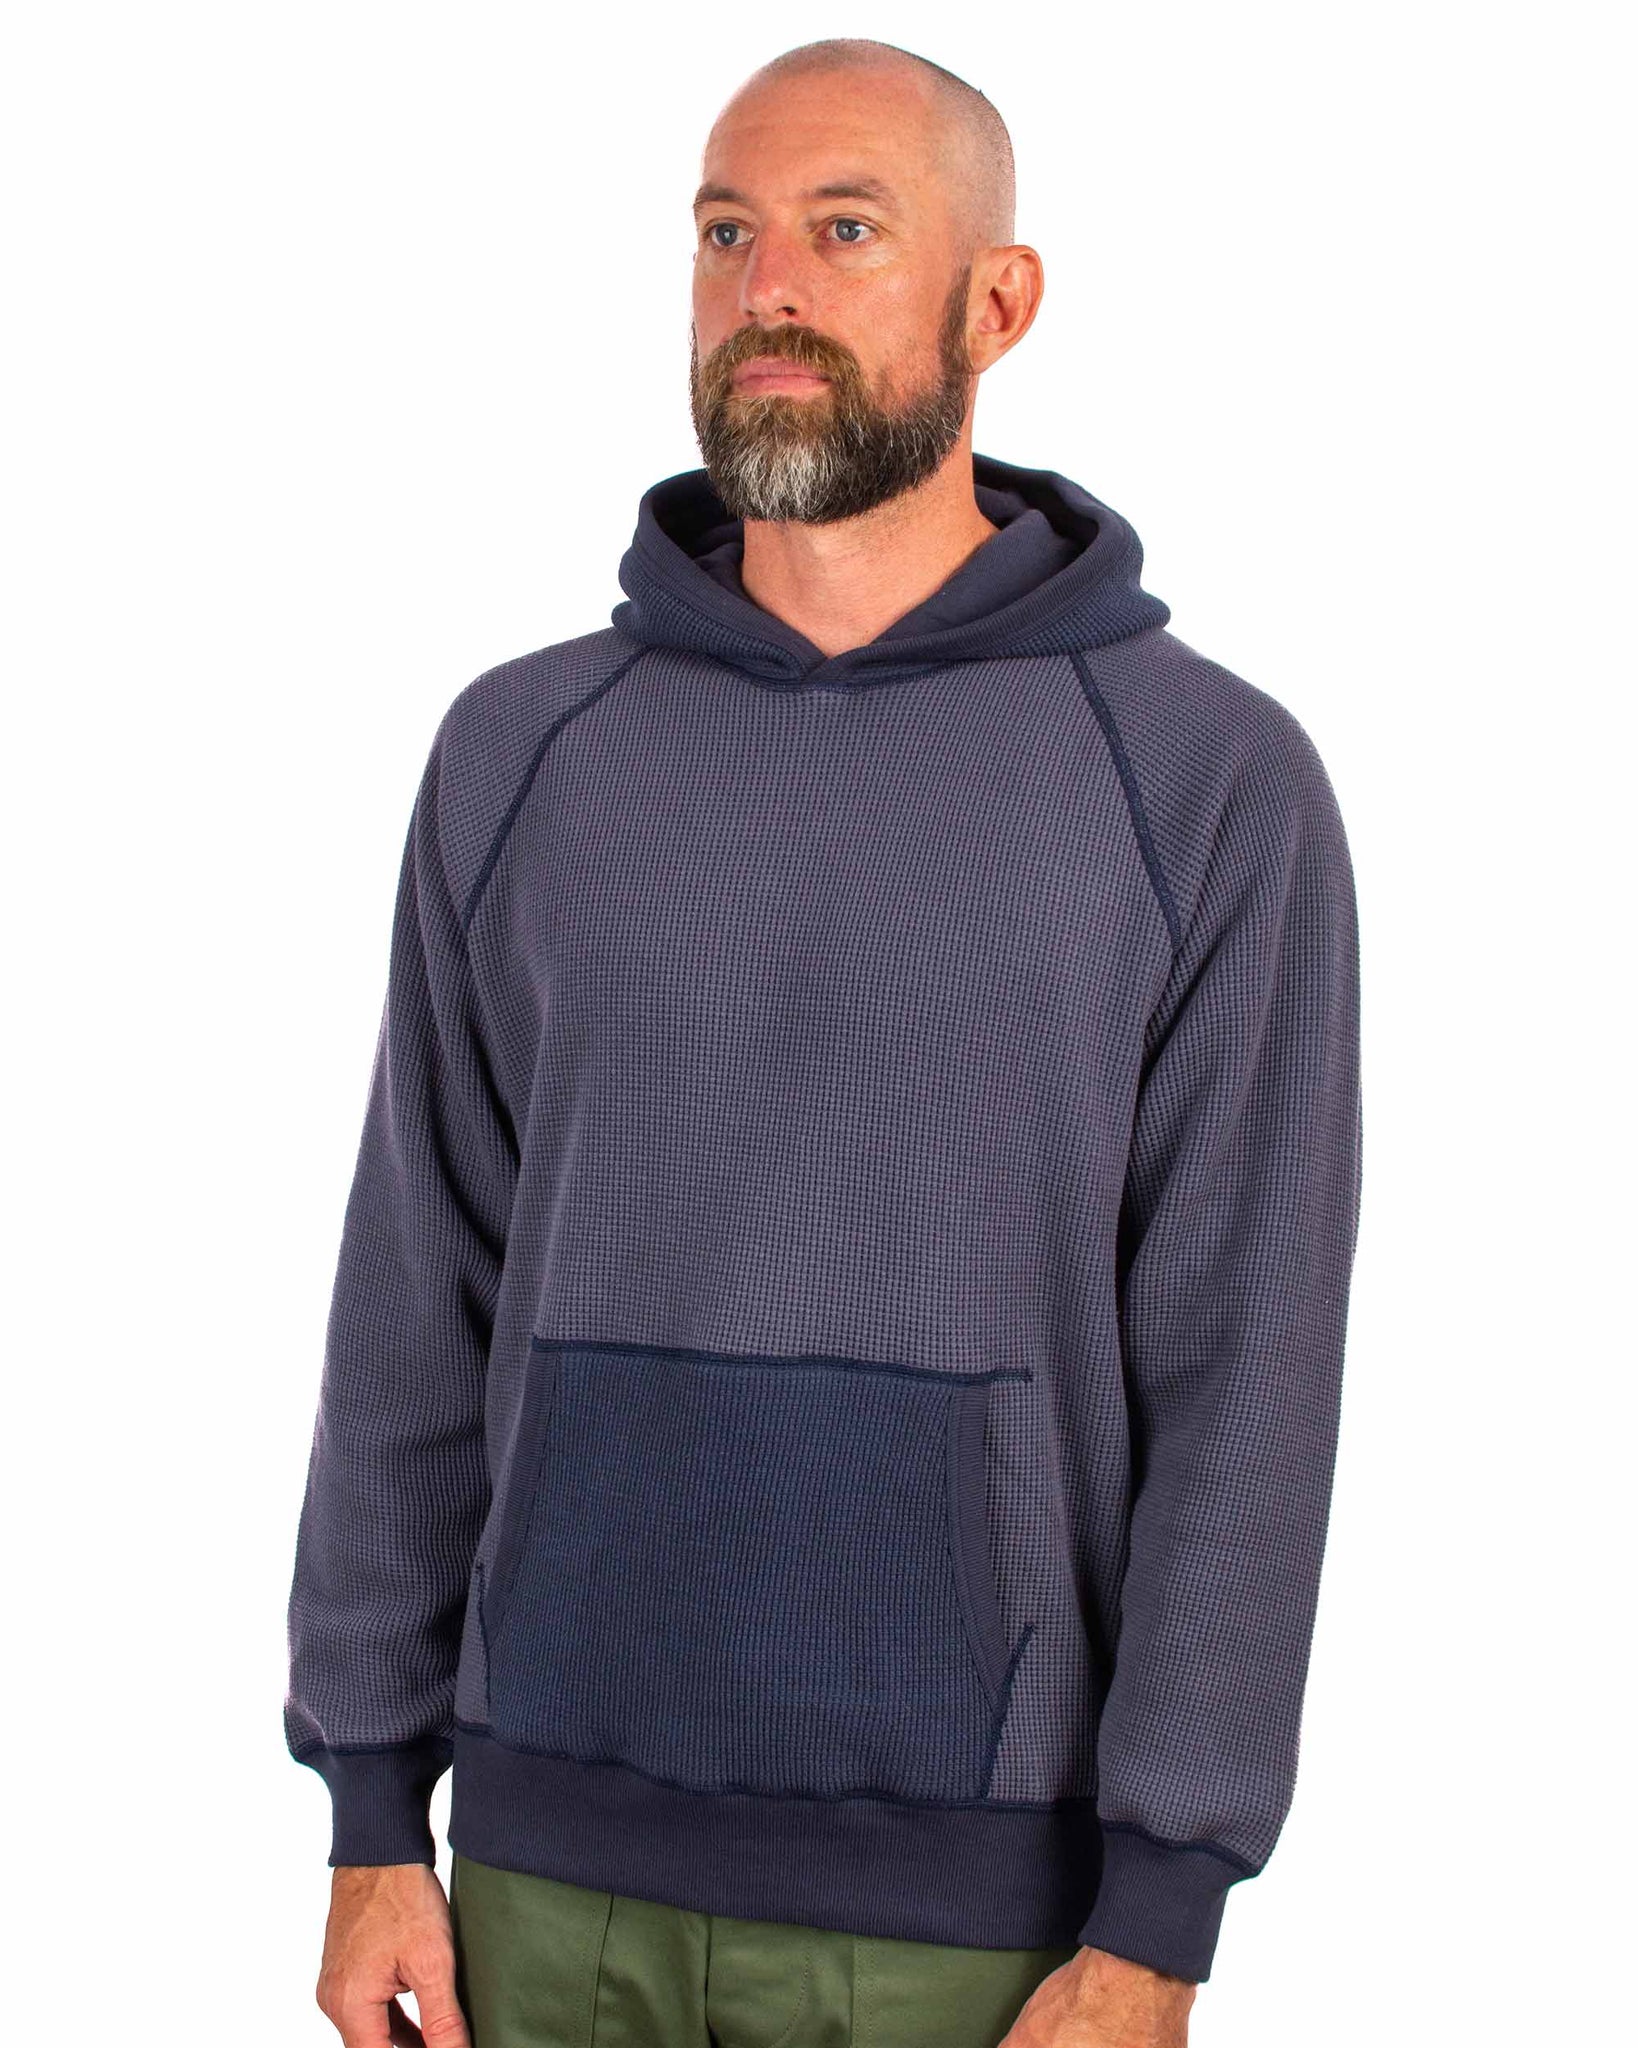 The Real McCoy's MC22005 Thermal Sweatshirt (Two-Tone) Navy Close